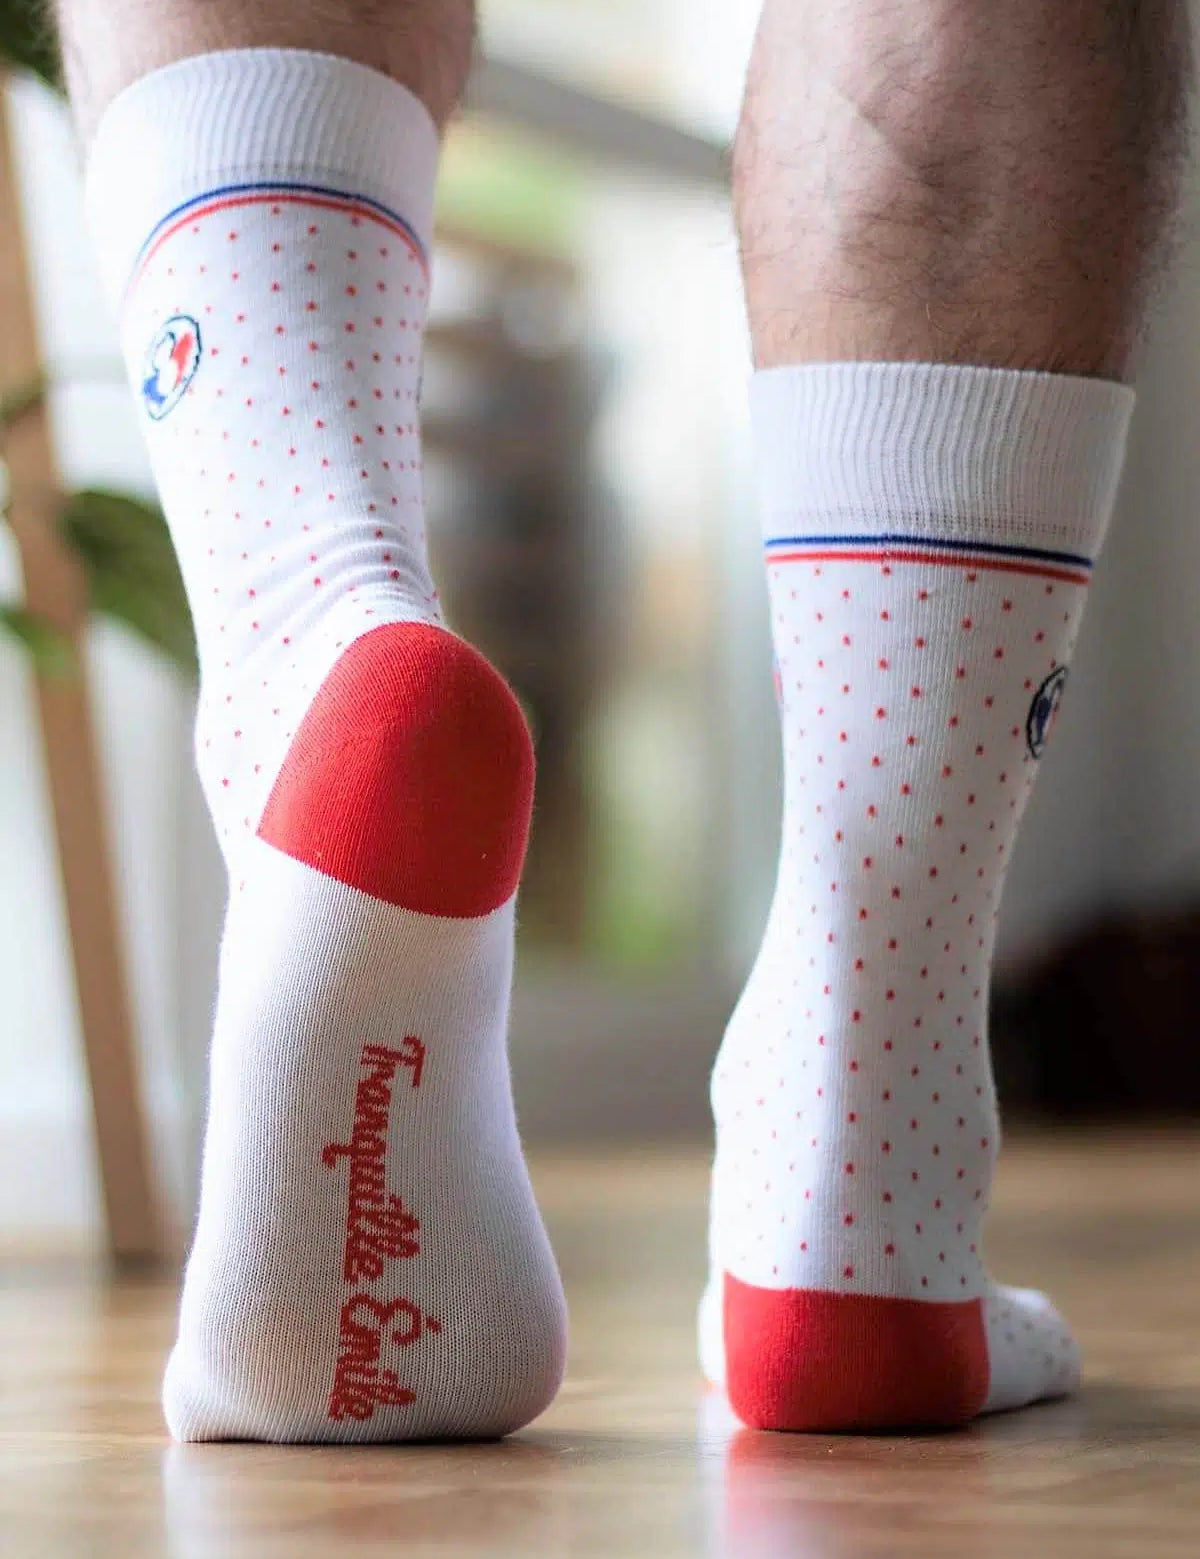 chaussettes-made-in-france-tranquille-emile-les-pois-blanc-rouge-3_jpg.webp